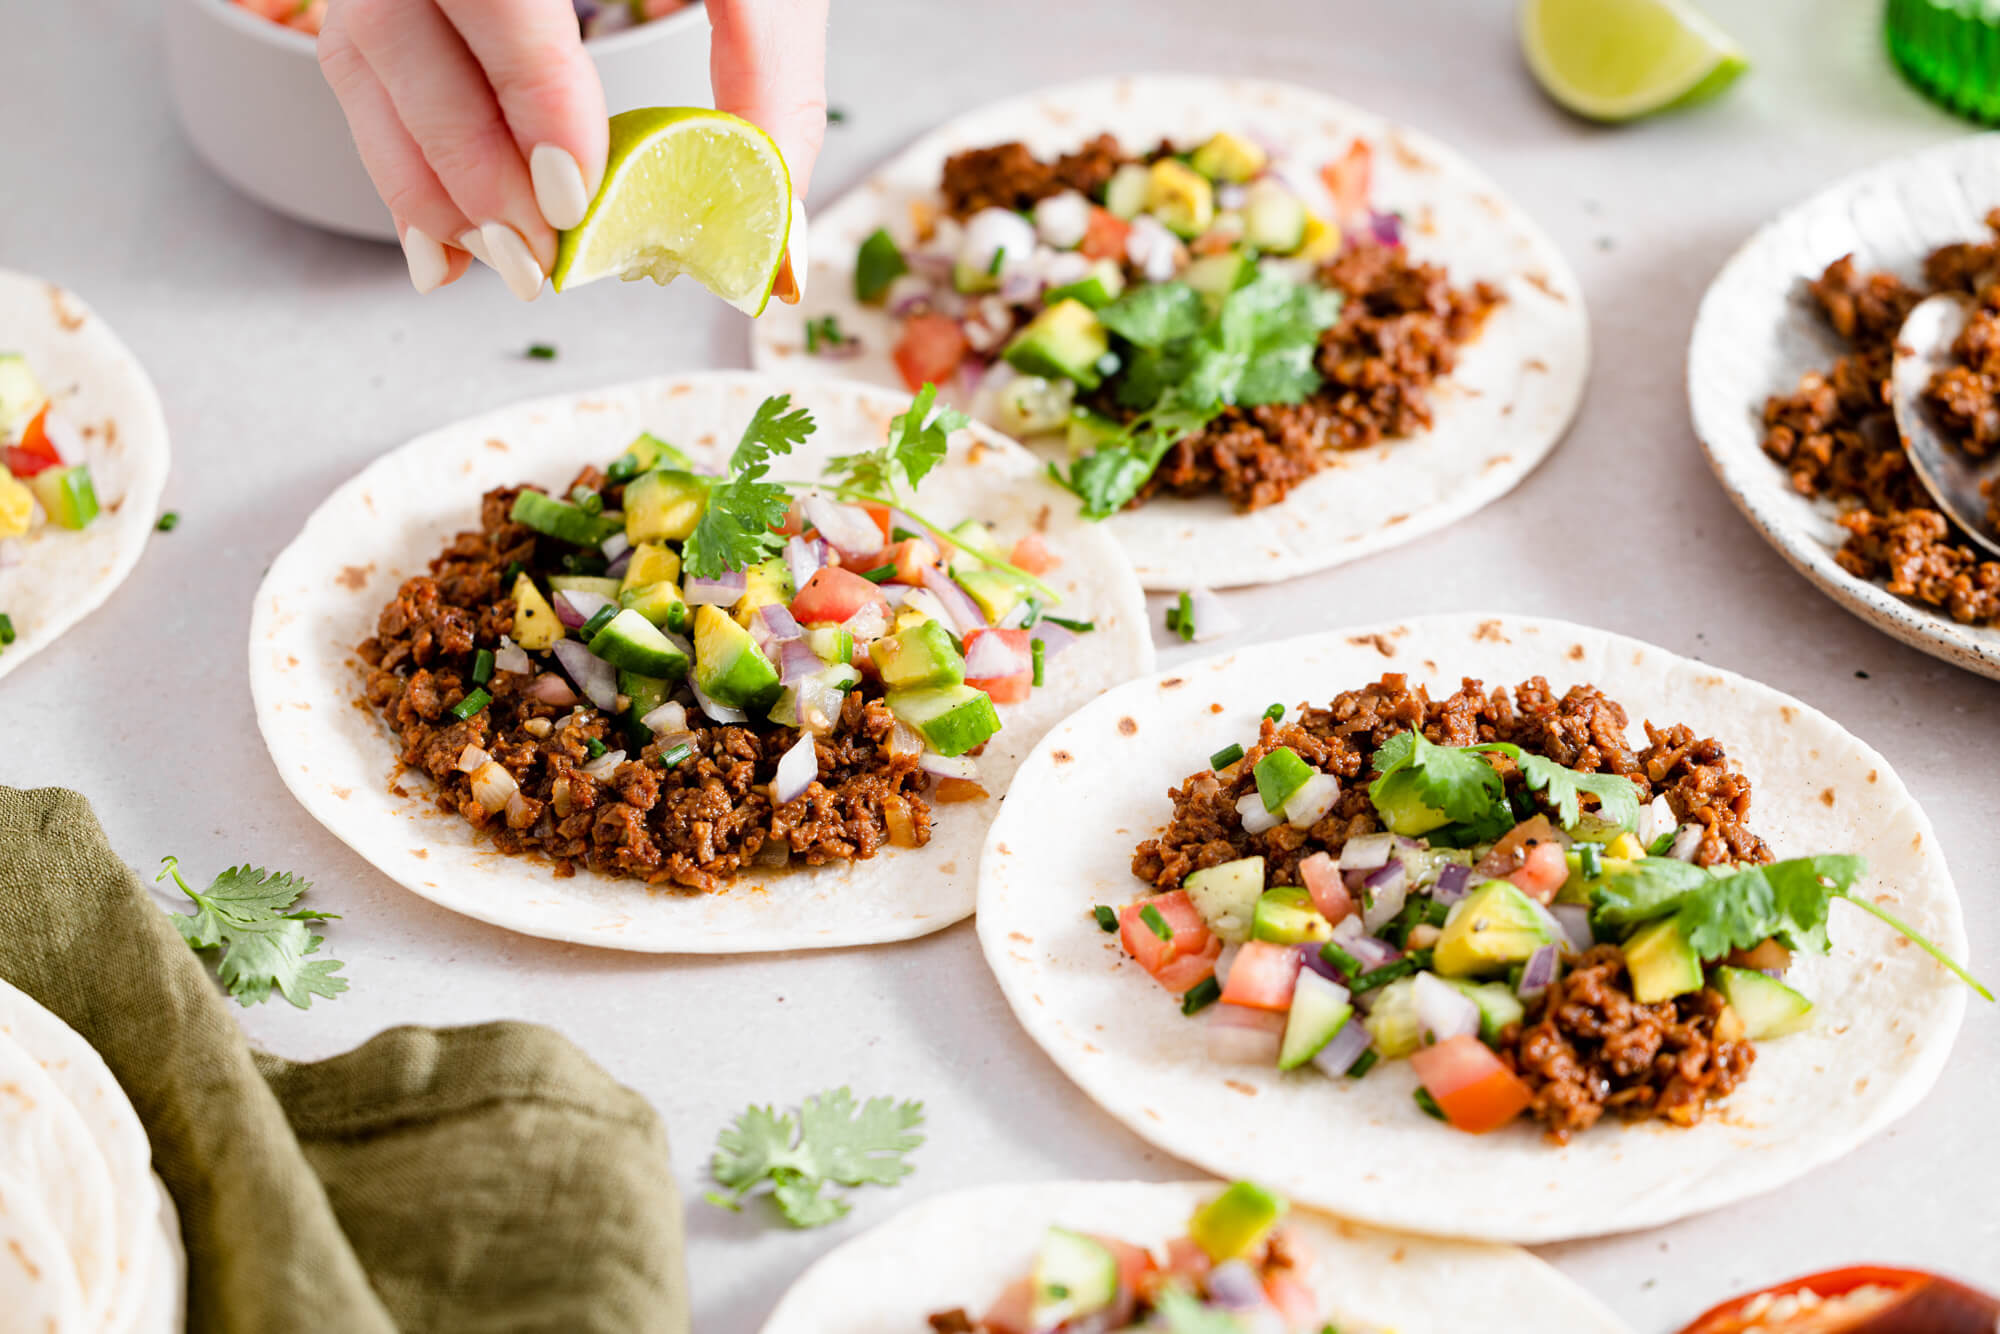 Savoury mince tacos with salsa